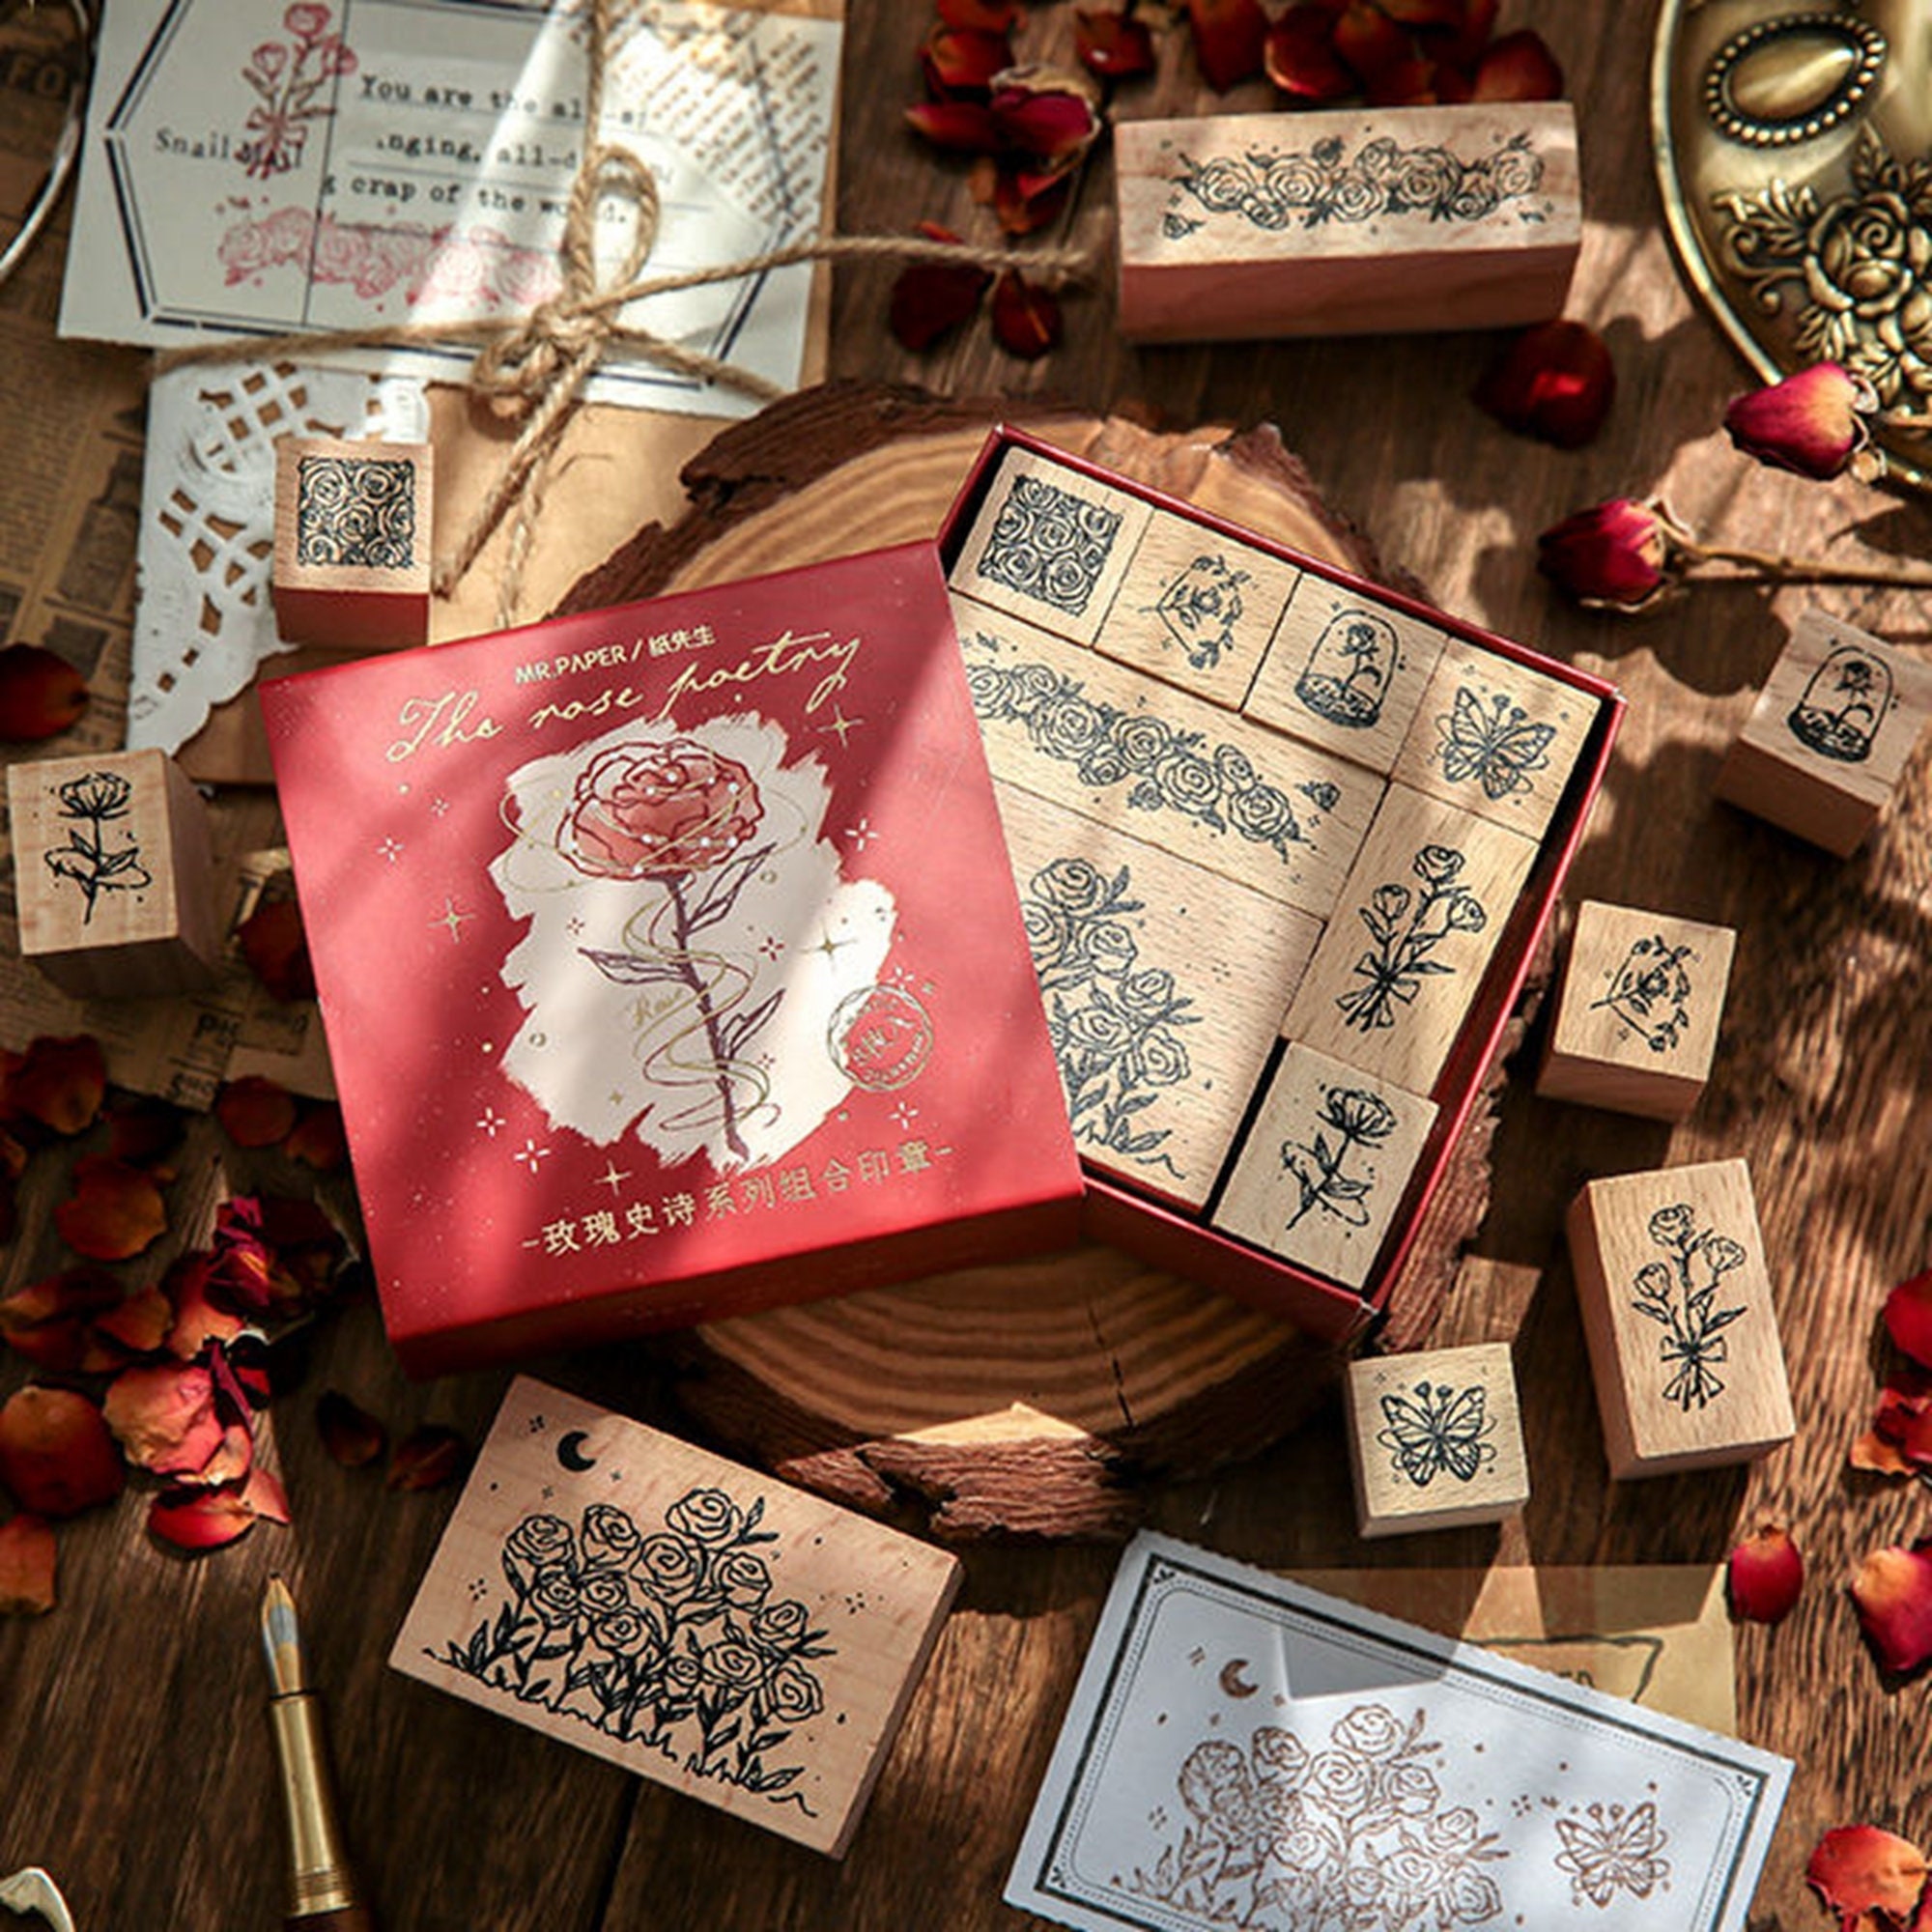 Rose Book Collection Vintage Wooden Rubber Stamp